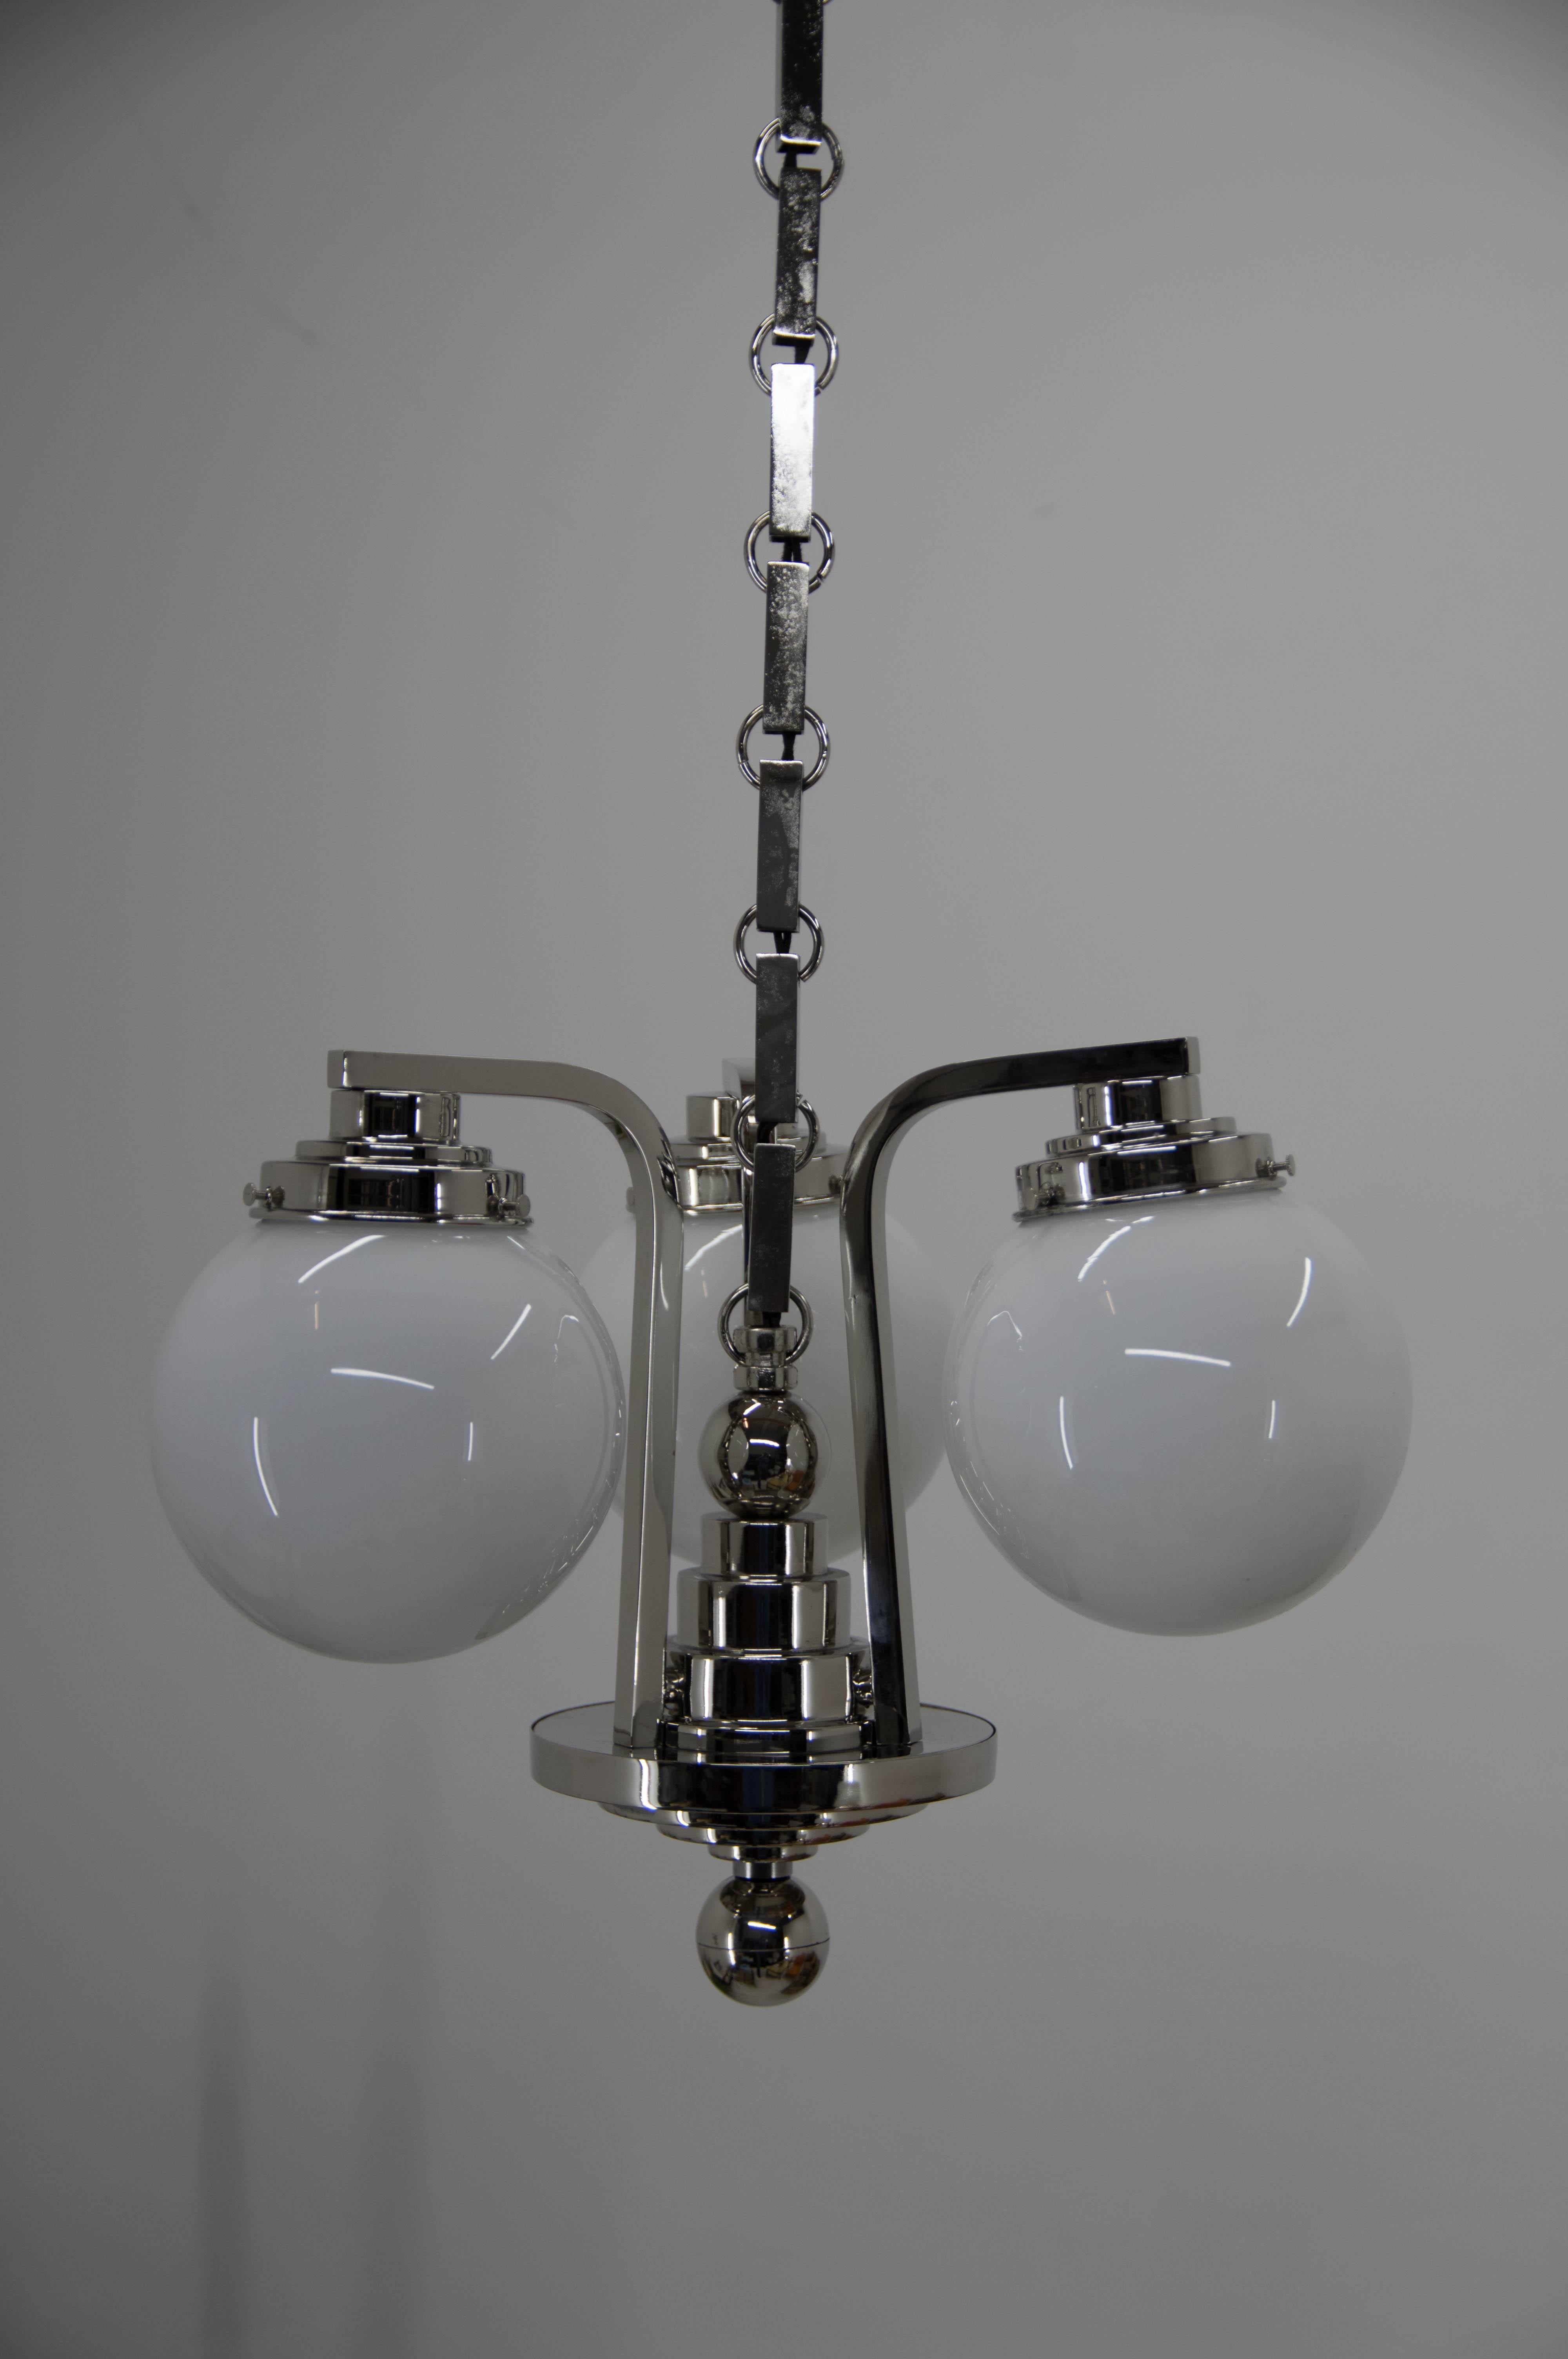 Beautiful Art Deco or Rondocubist chandelier.
Completely restored: new nickel-plating, new glass
The height could be shortened on demand
Rewired: 3 x 40W, E25-E27 bulbs
US wiring compatible.
   